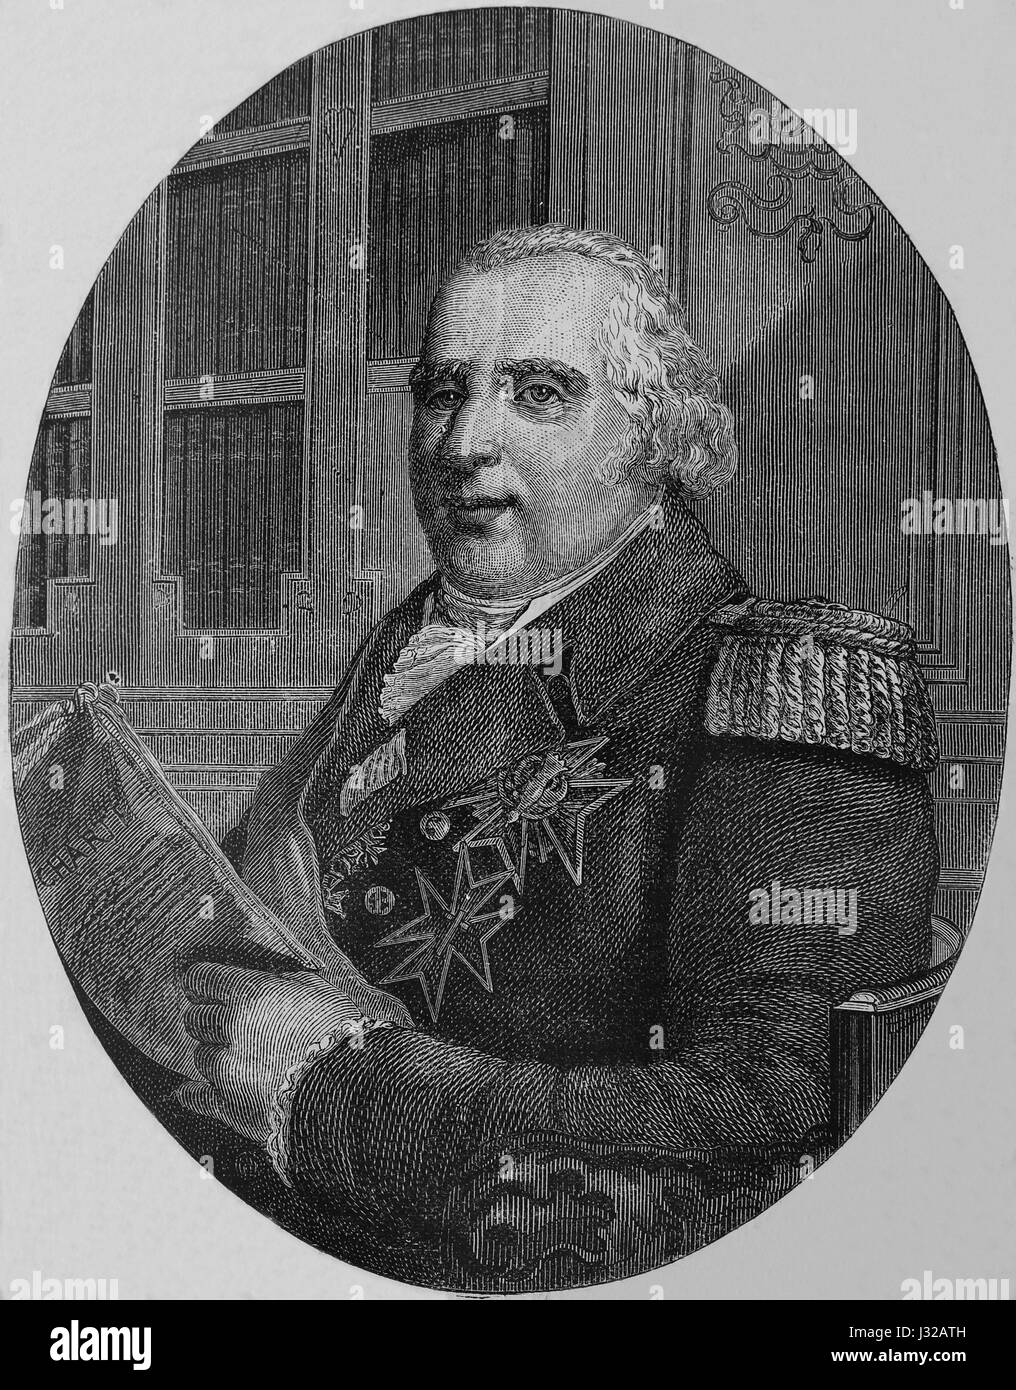 Louis XVIII of France (1755-1824). The Desired. King of France. Portrait. Engraving, Nuestro Siglo, 1883. Spanish edition. Stock Photo